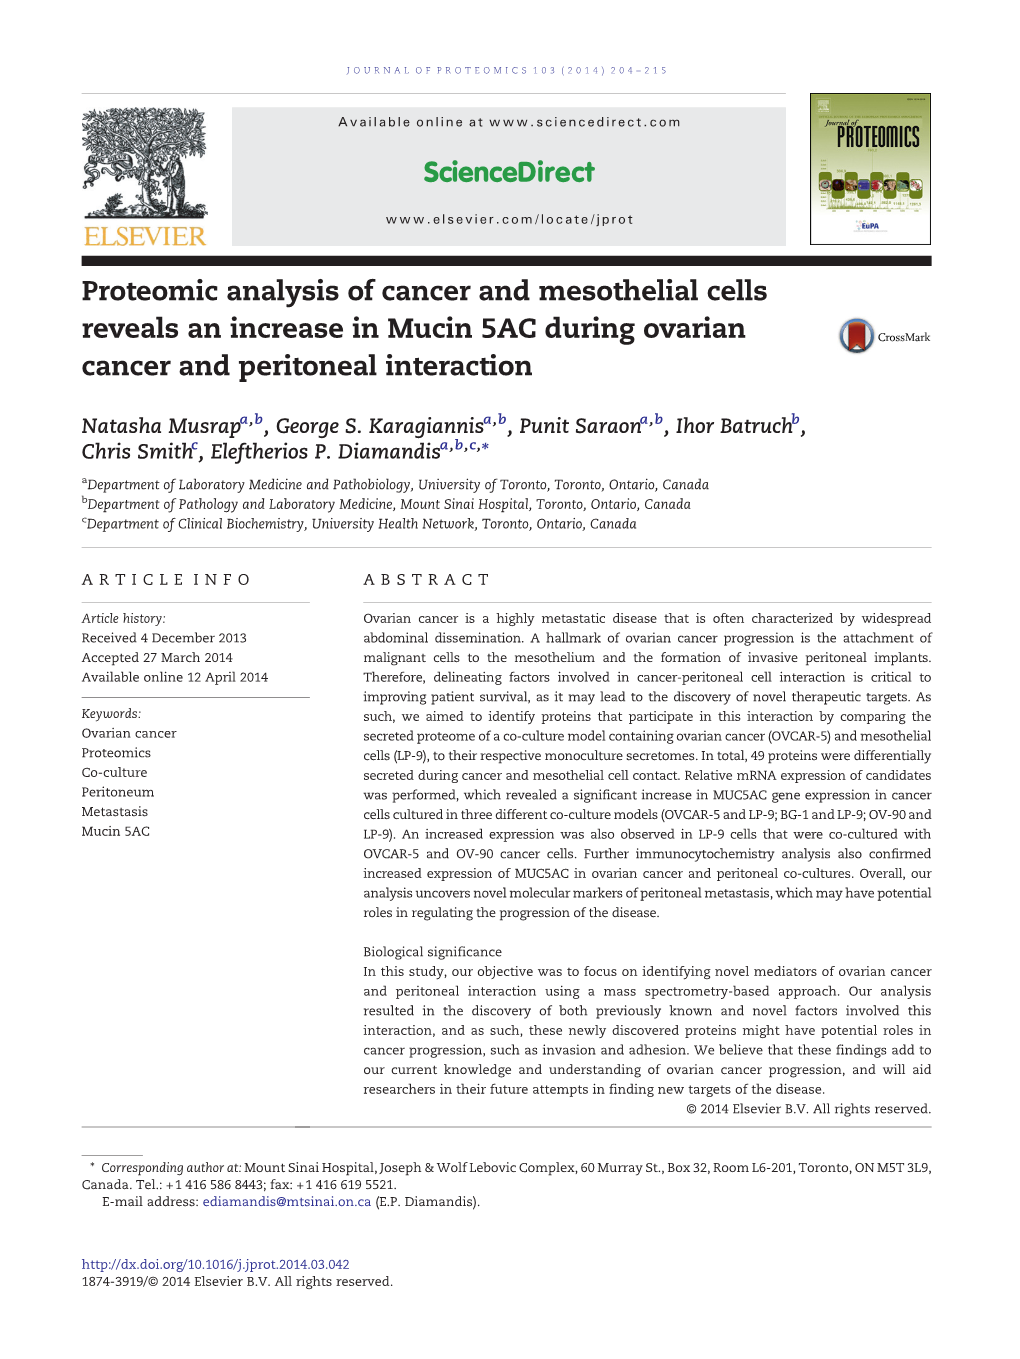 Proteomic Analysis of Cancer and Mesothelial Cells Reveals an Increase in Mucin 5AC During Ovarian Cancer and Peritoneal Interaction